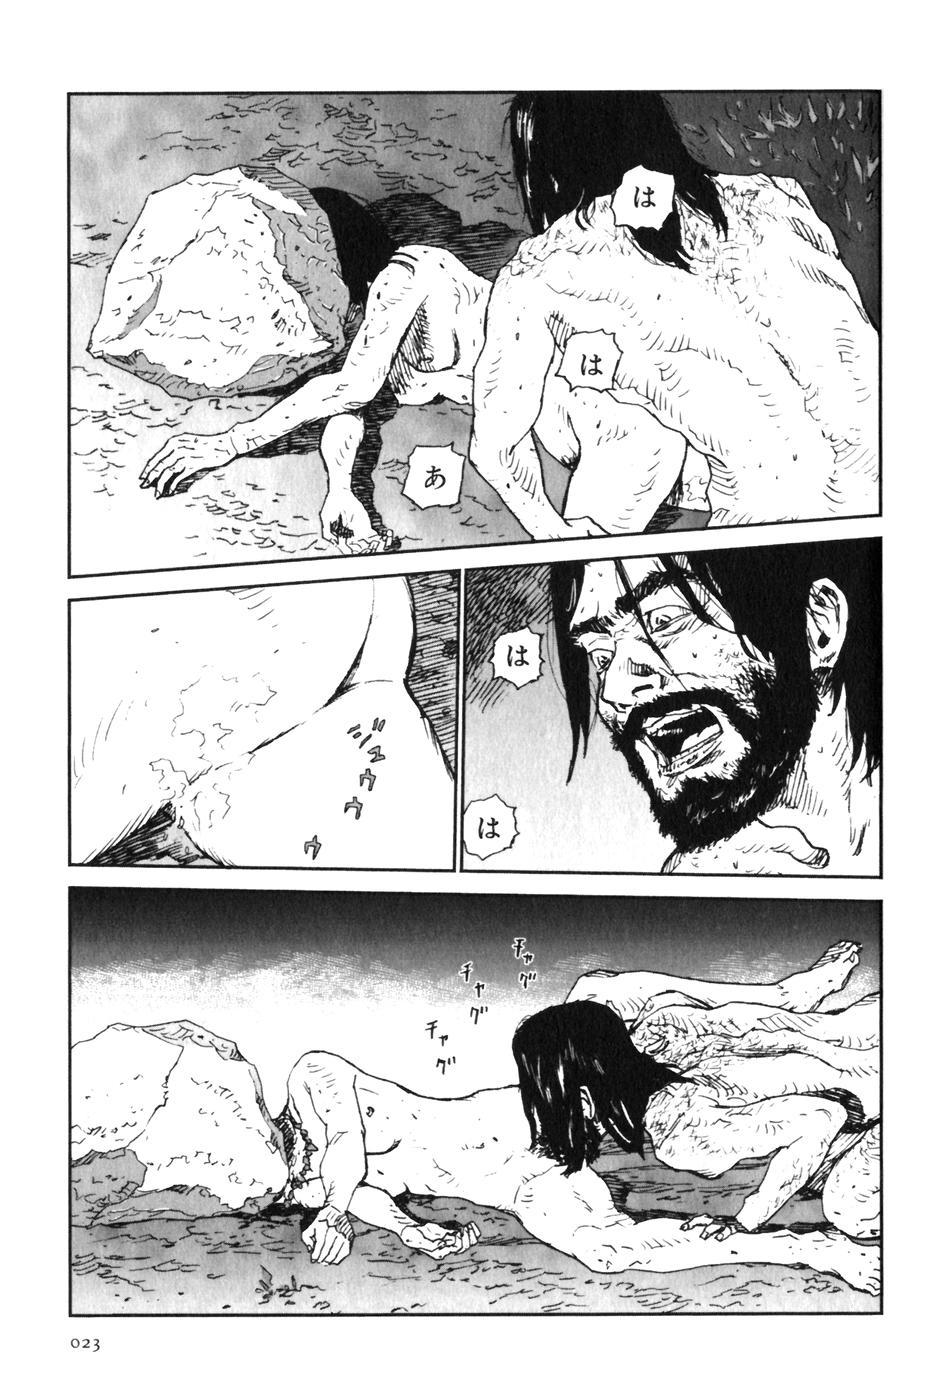 Does anyone know the source of these manga? R18-G 5